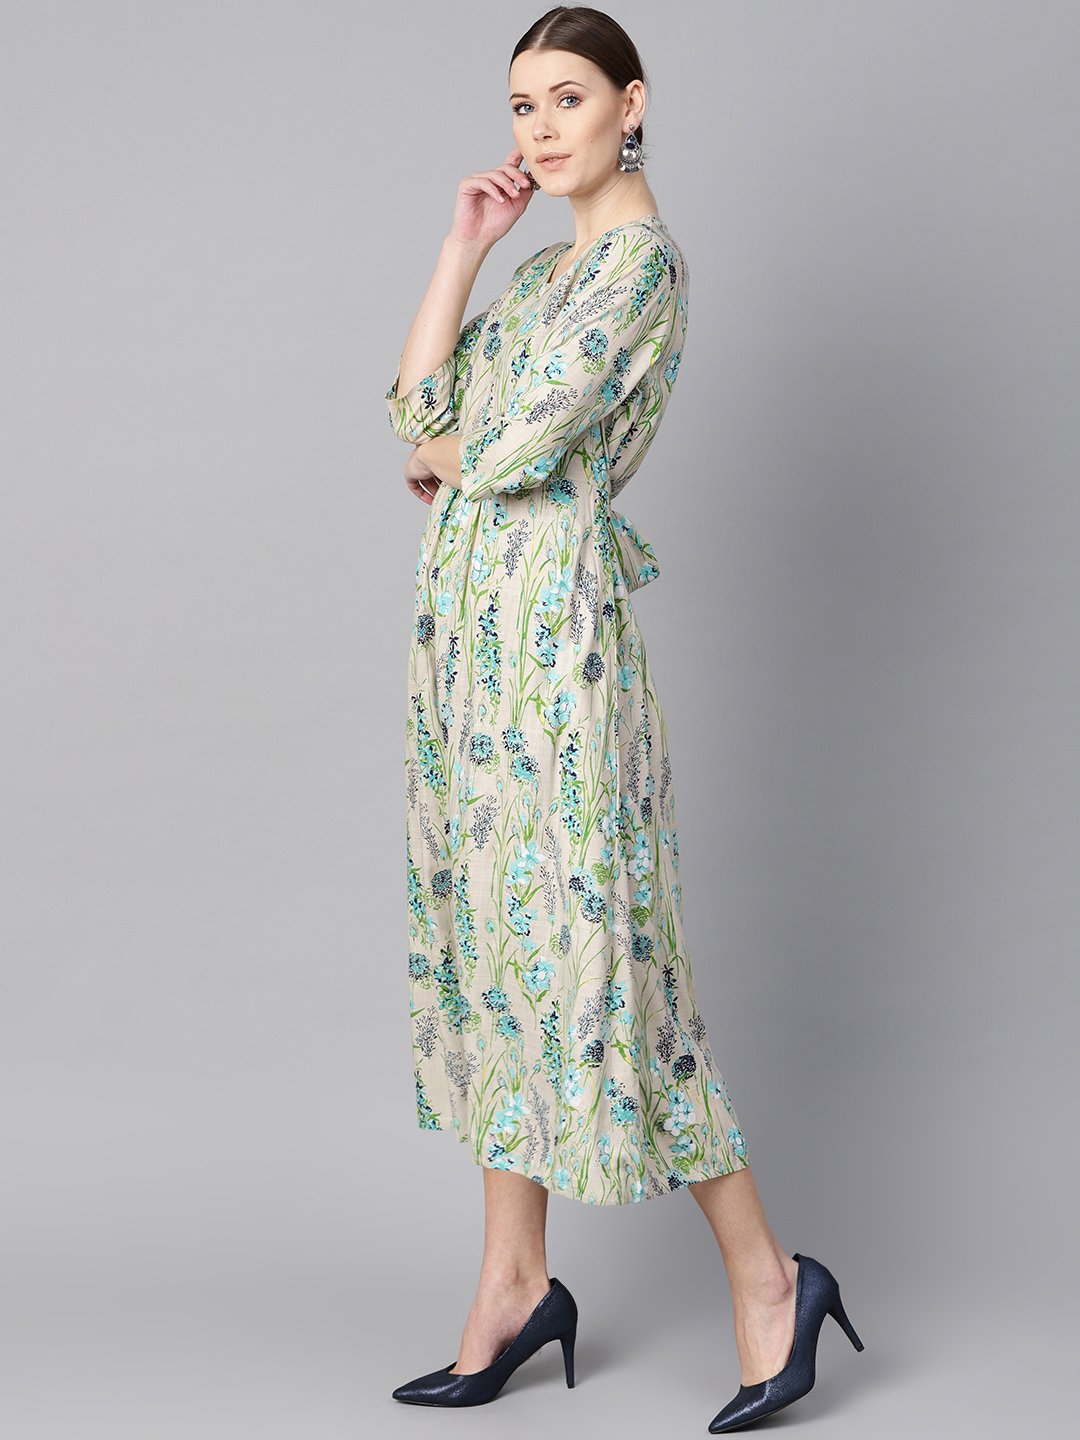 Women's Floral Print Dress With Gathers In Centre With A Belt At The Back - Nayo Clothing